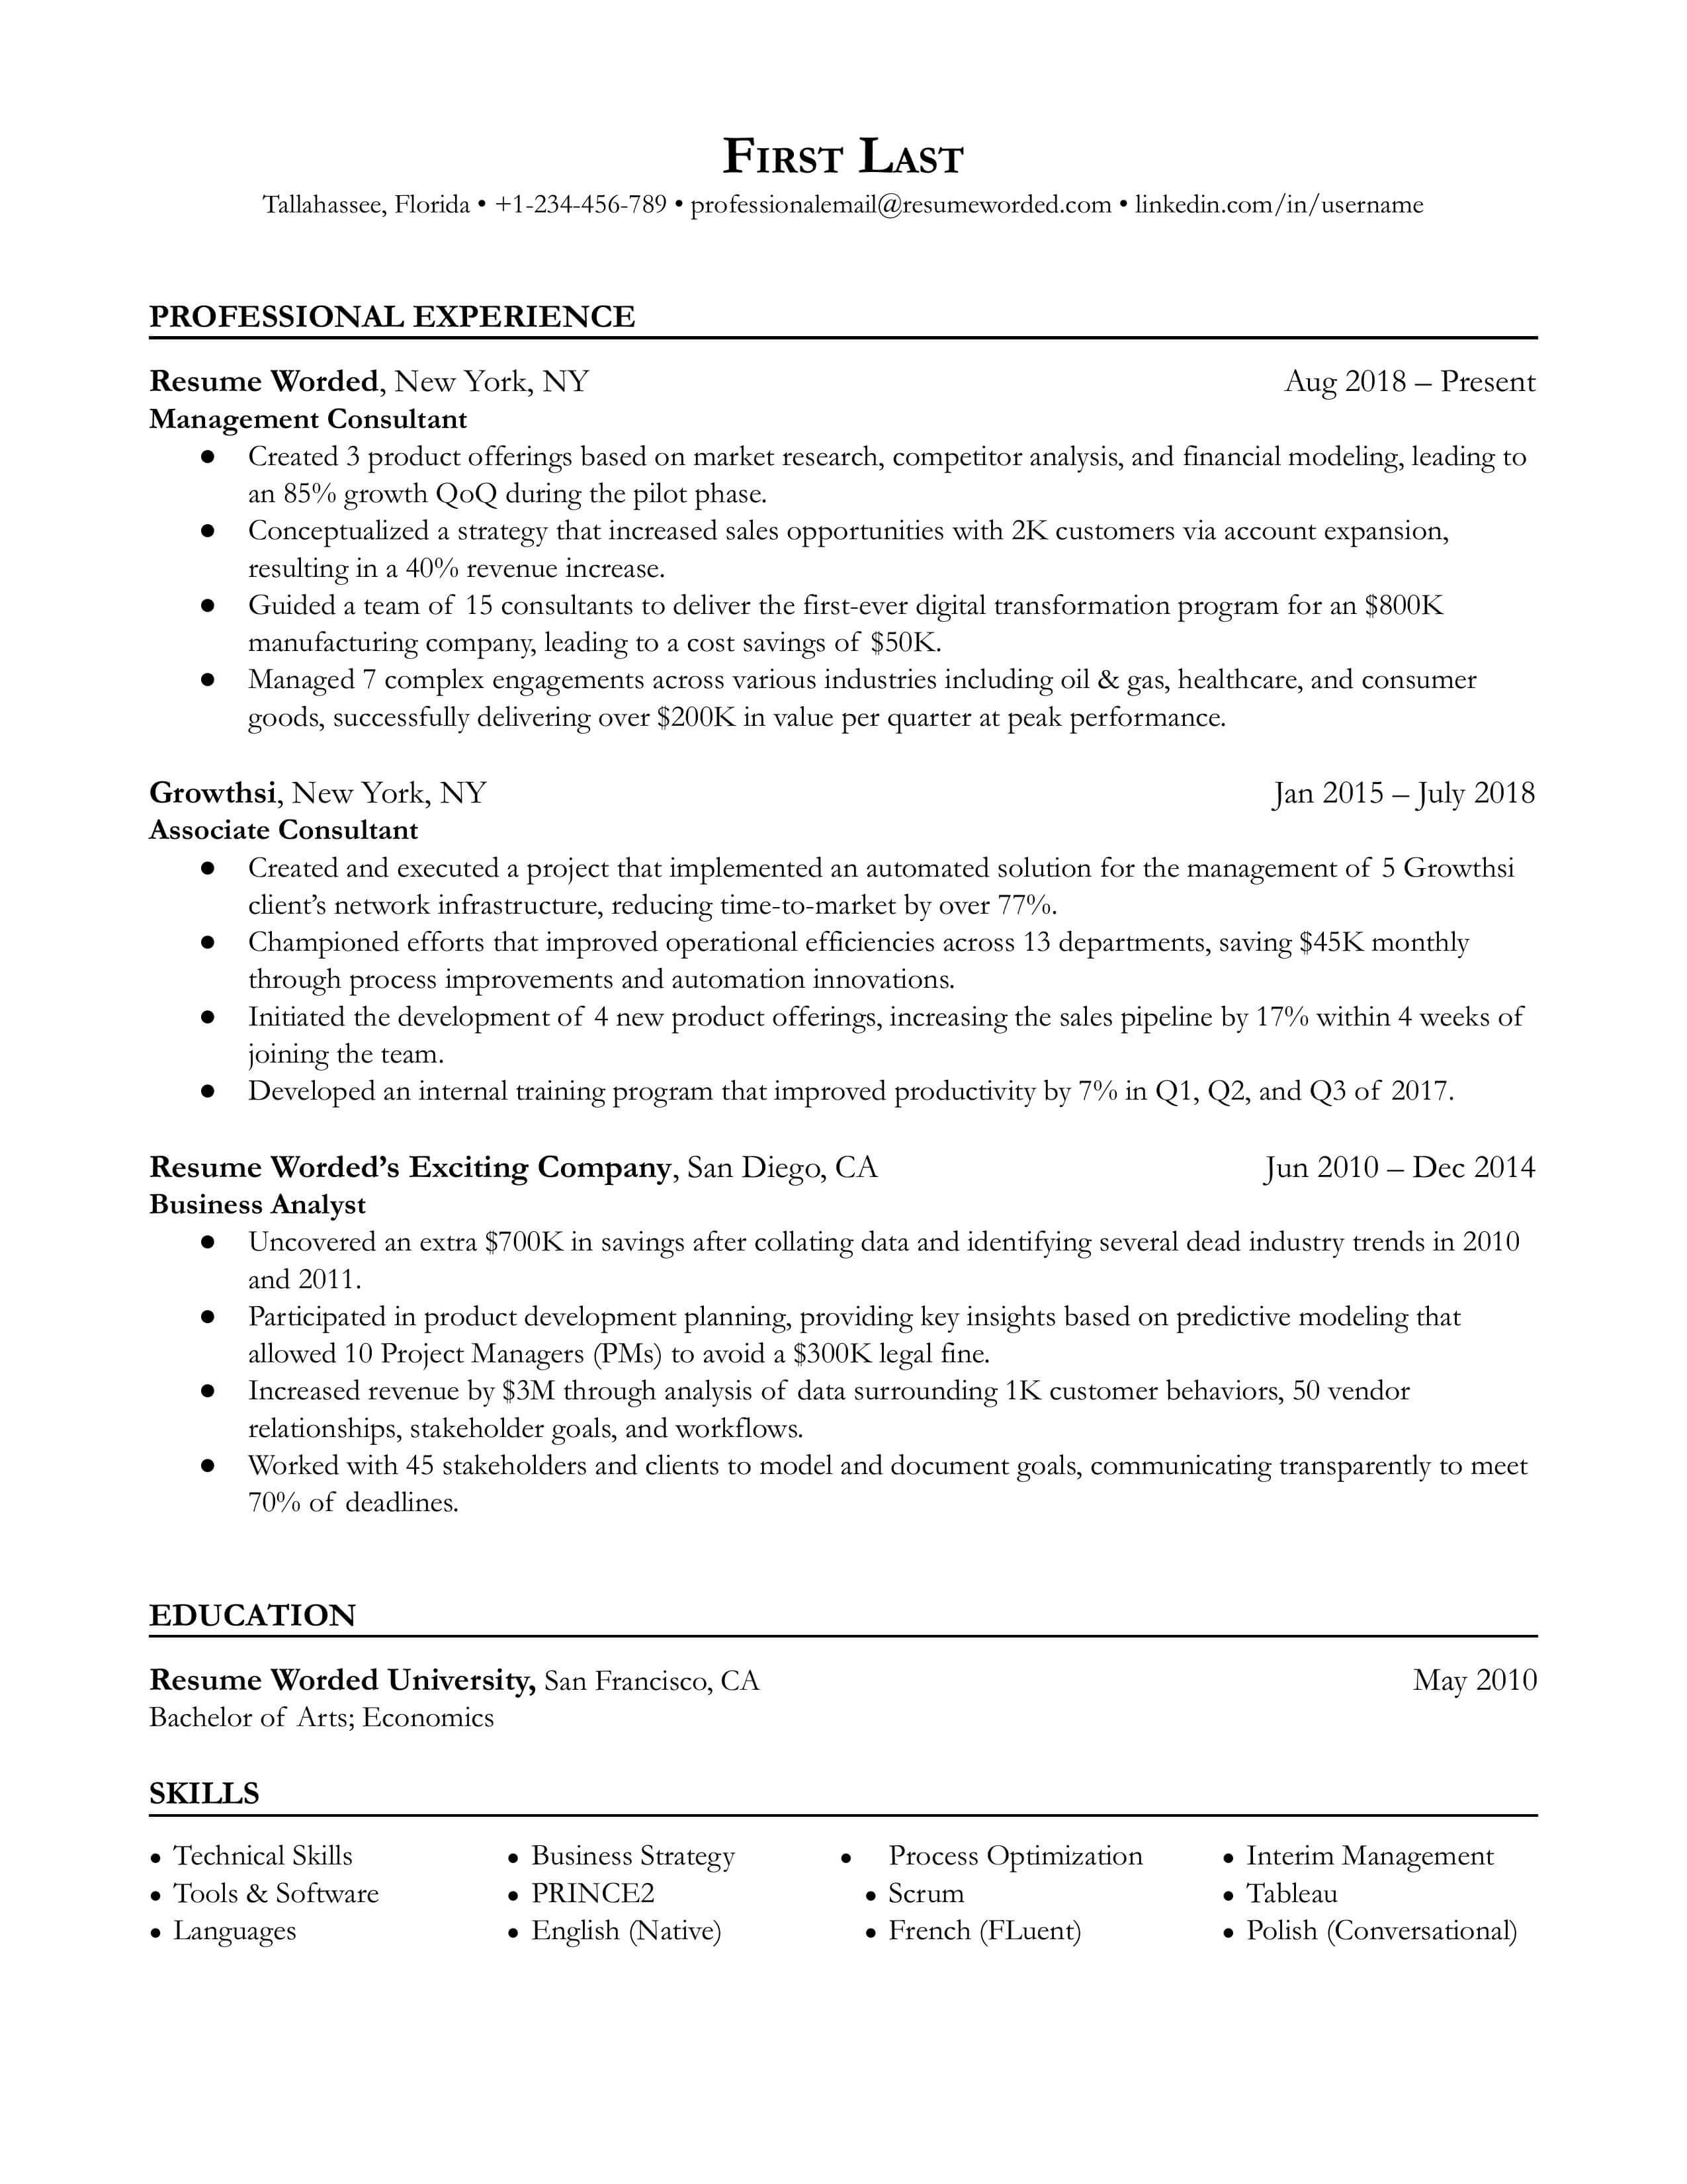  A management consultant resume example that emphasizes work experience